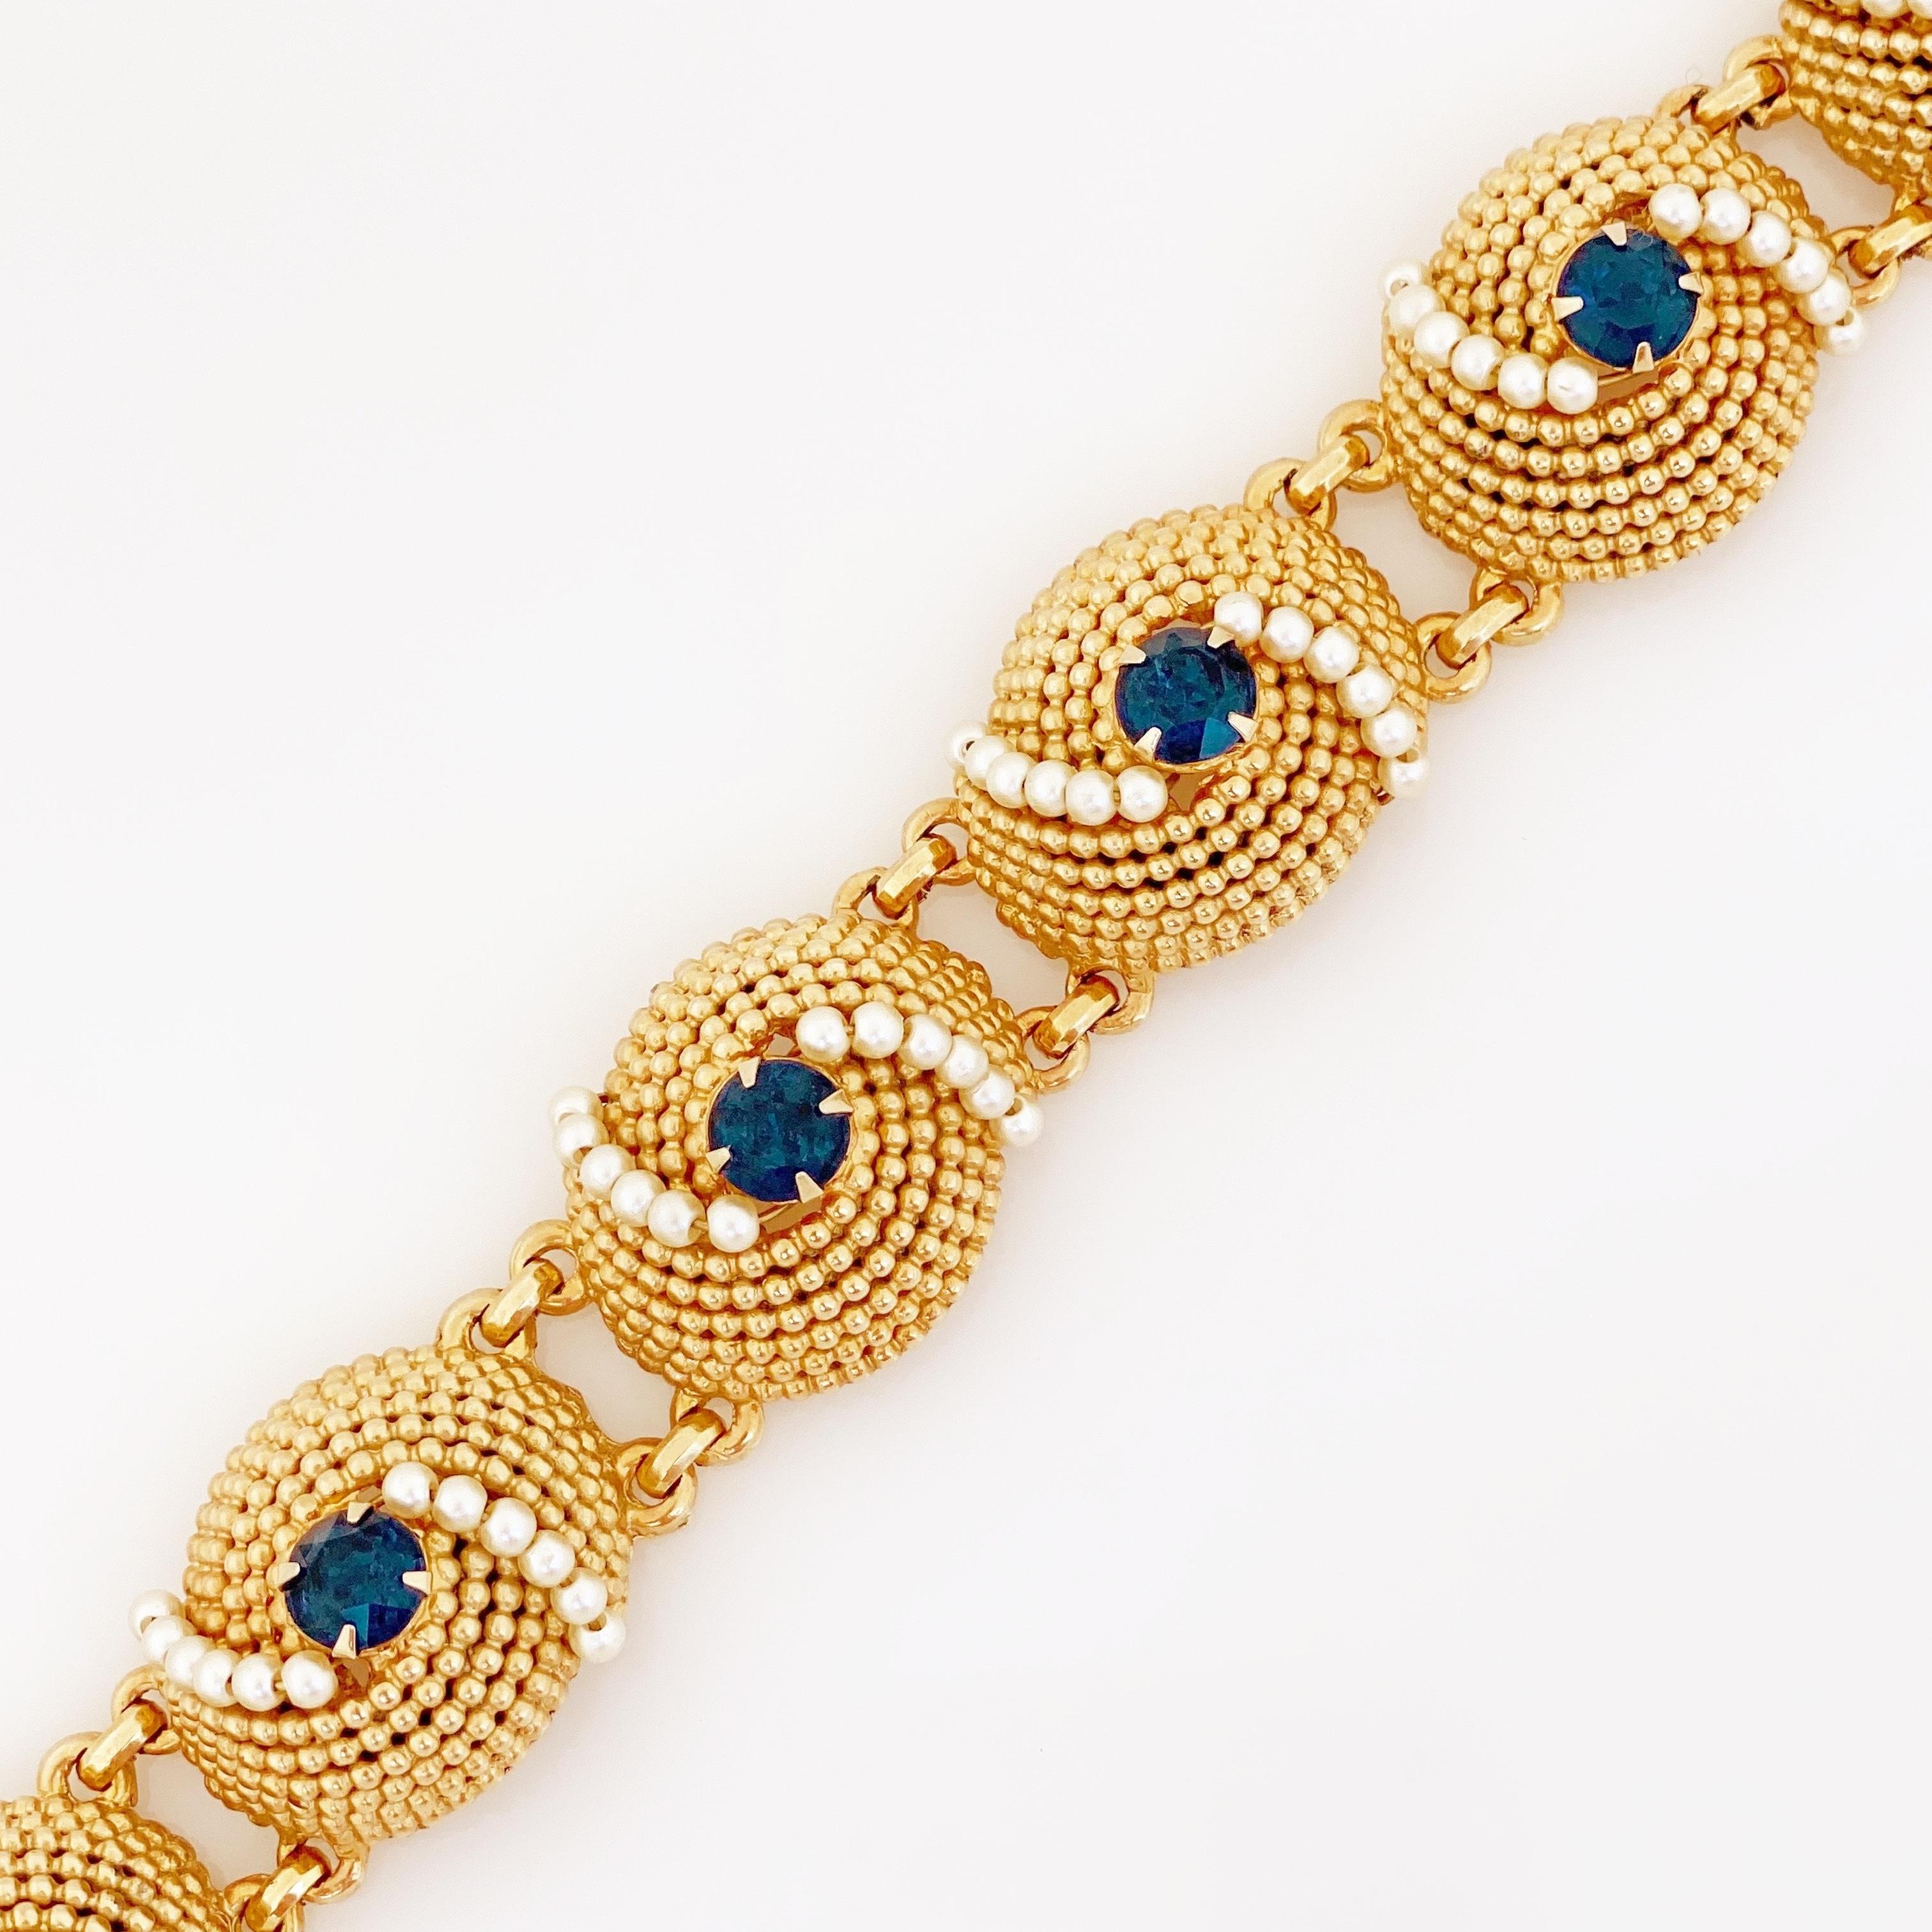 Modern Gold Dome Link Bracelet With Sapphire Crystals & Pearls By Napier, 1970s